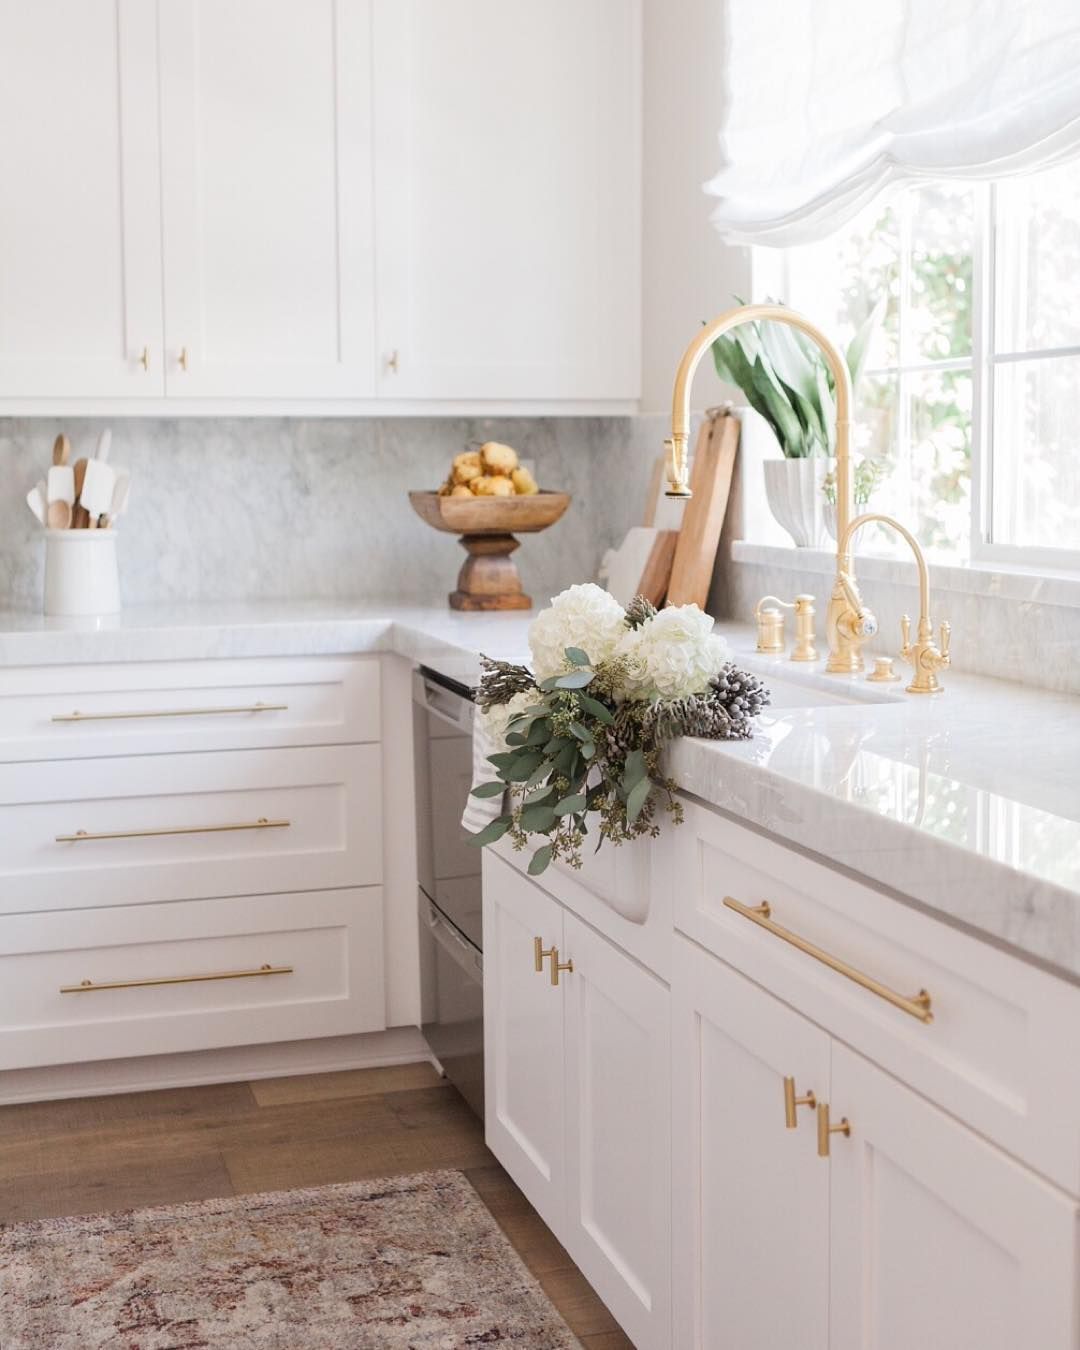 Looking in on this dreamy corner this Friday afternoon.  #baudinkitchenreno photography by @mandyoliverphoto